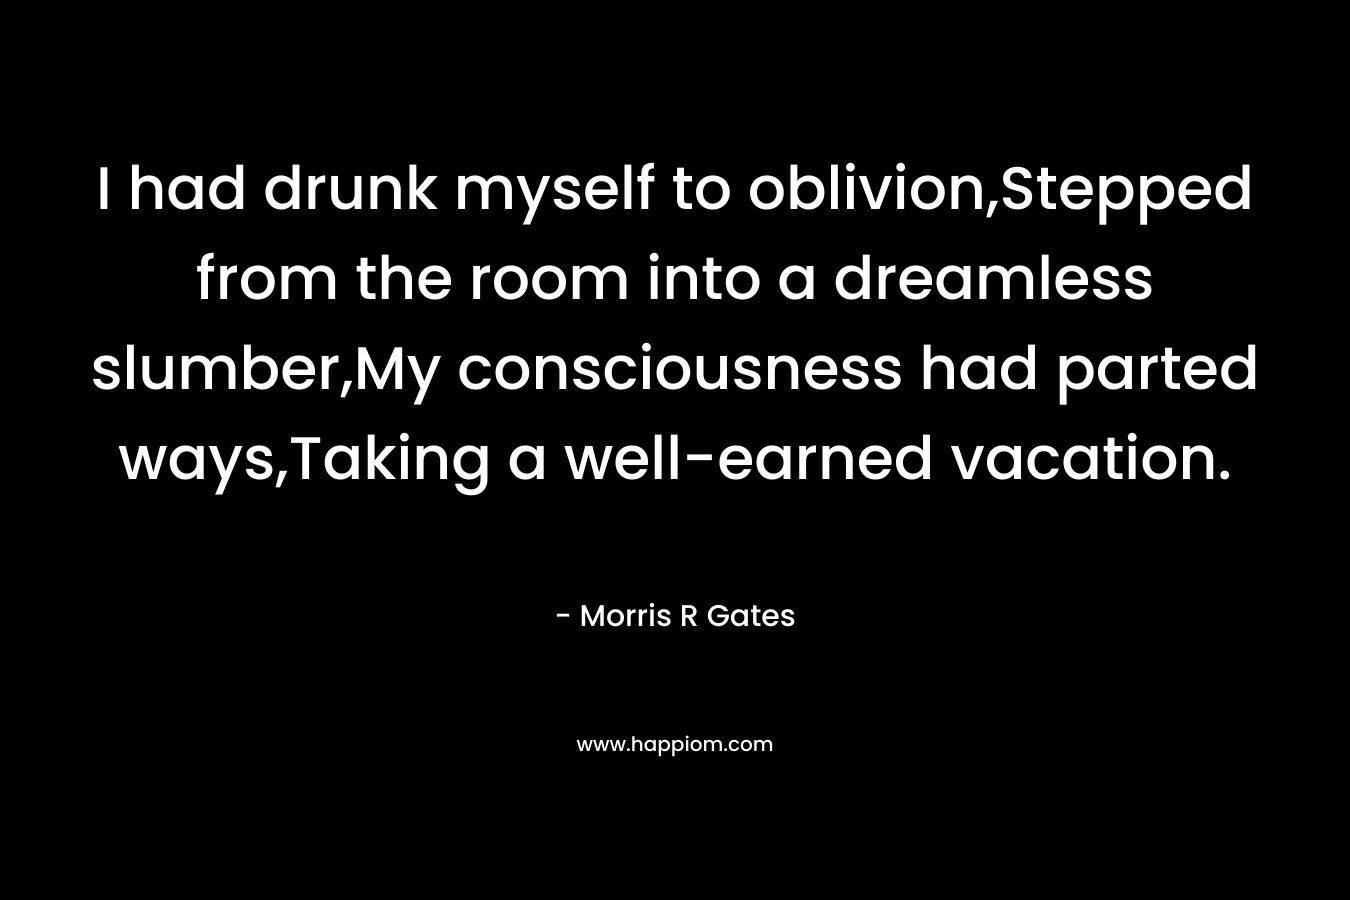 I had drunk myself to oblivion,Stepped from the room into a dreamless slumber,My consciousness had parted ways,Taking a well-earned vacation. – Morris R Gates